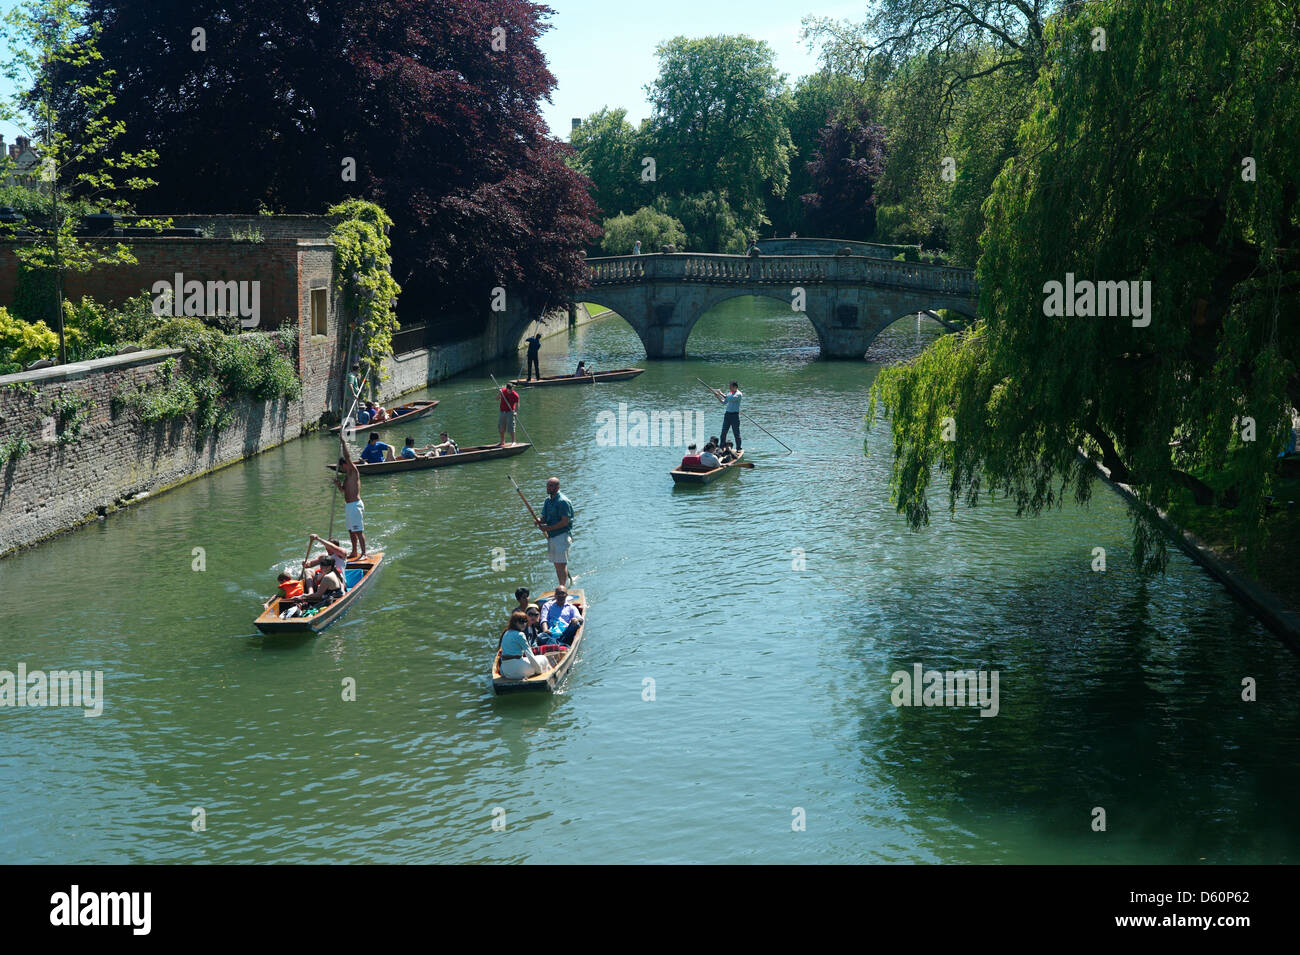 Cambridge punting, Cambridge, England,May 2010. Punting on the famous 'Backs' in the University City of Cambridge. Stock Photo